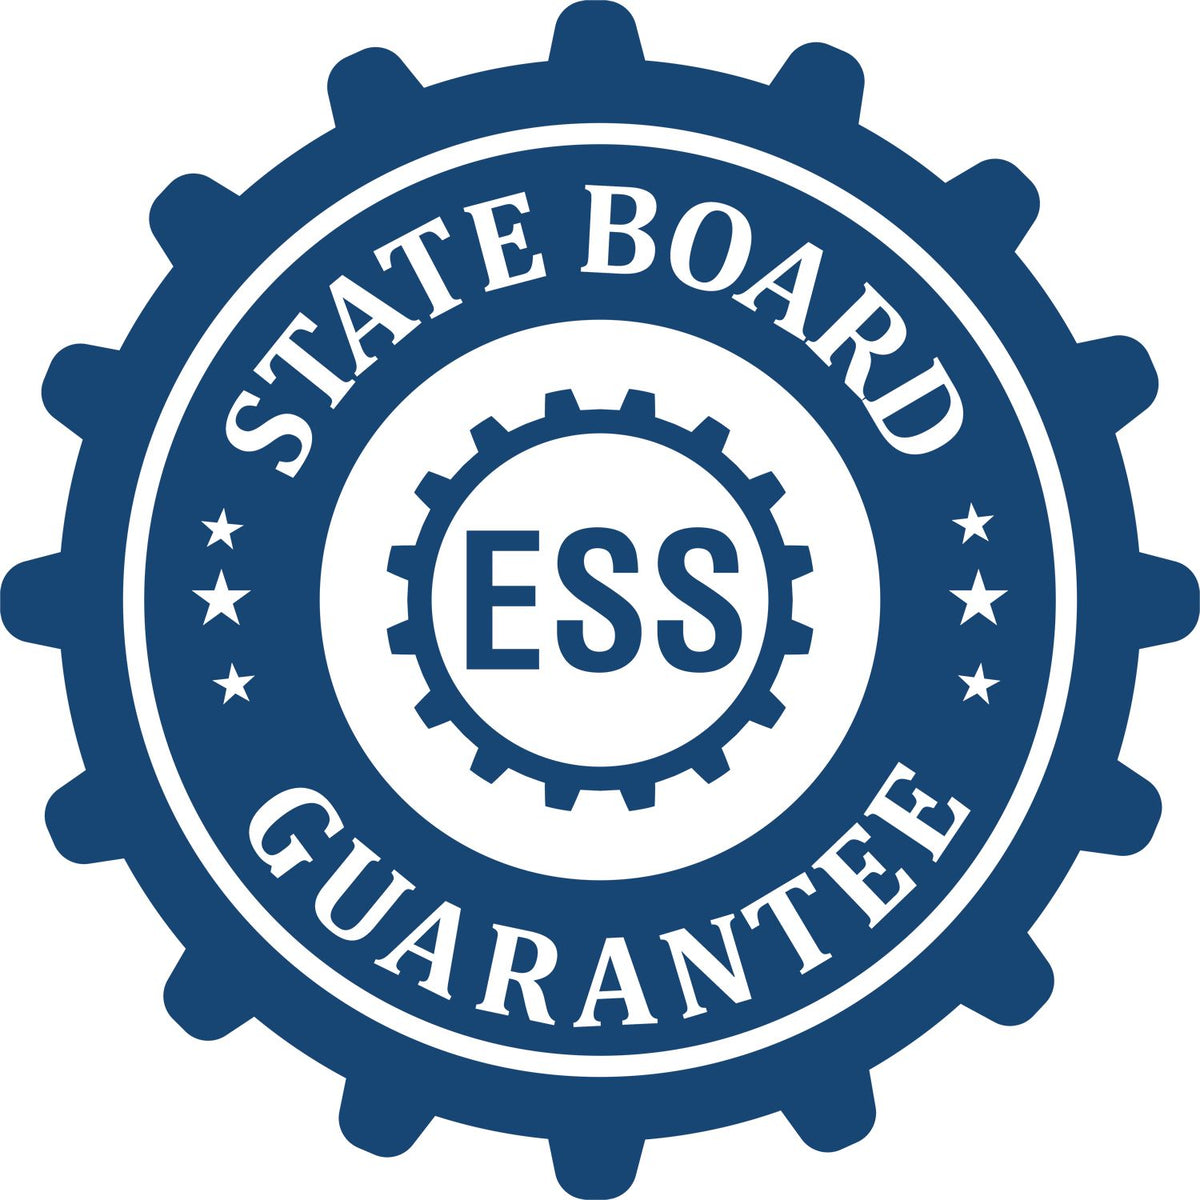 An emblem in a gear shape illustrating a state board guarantee for the MaxLight Premium Pre-Inked Washington Rectangular Notarial Stamp product.